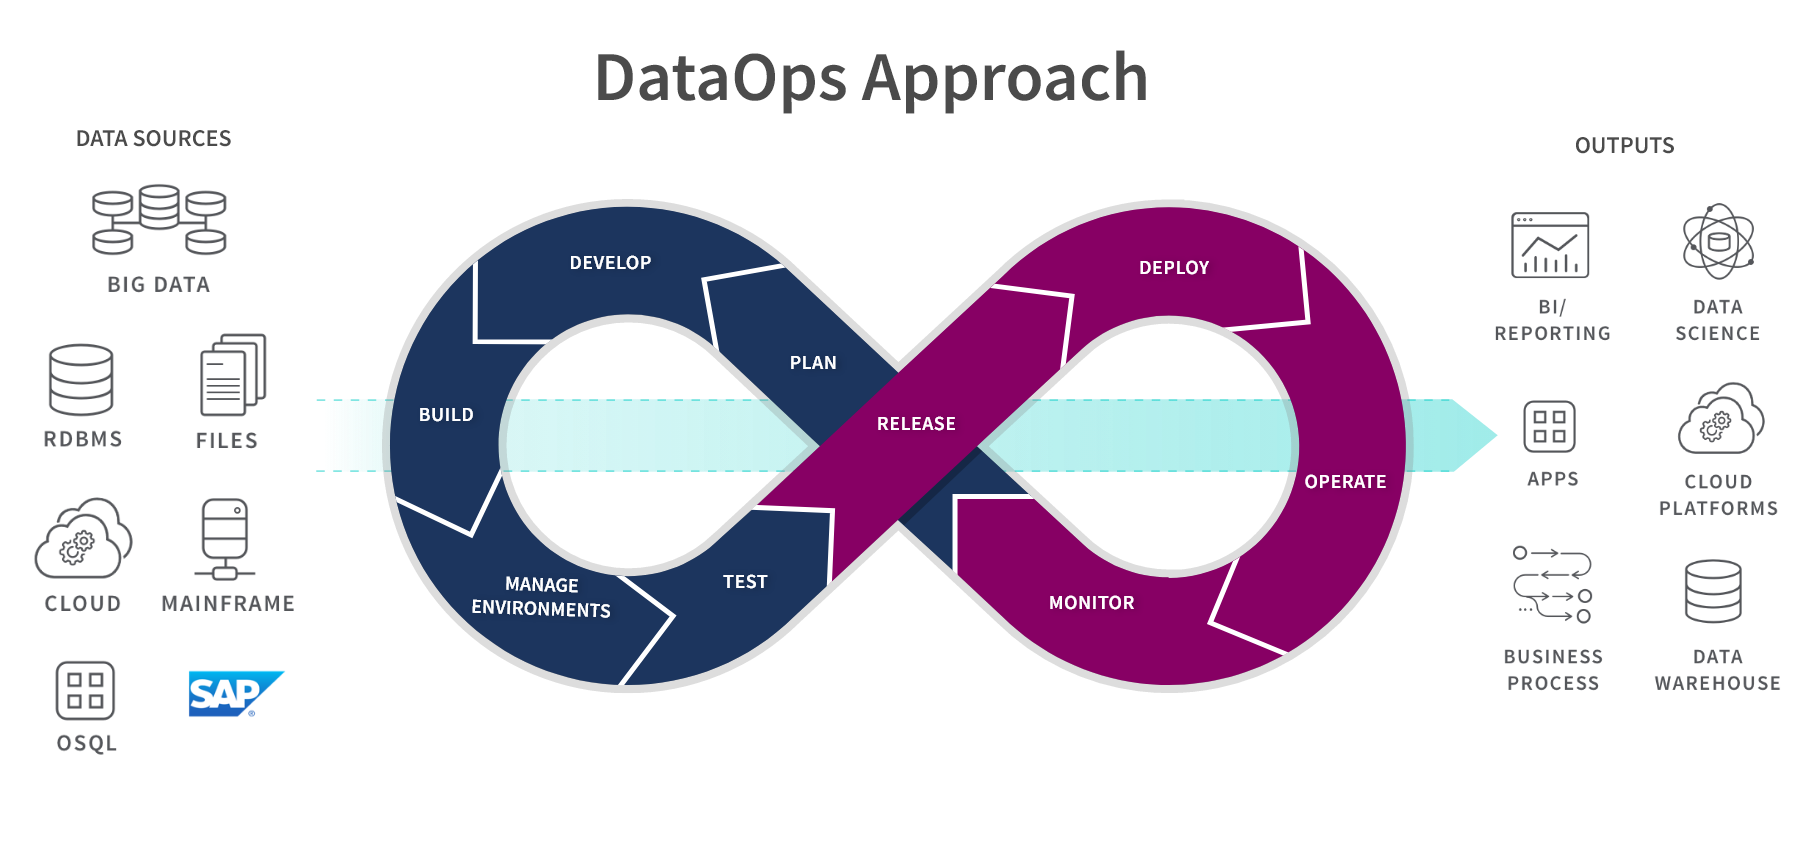 Diagram showing the steps to implement an agile DataOps process.